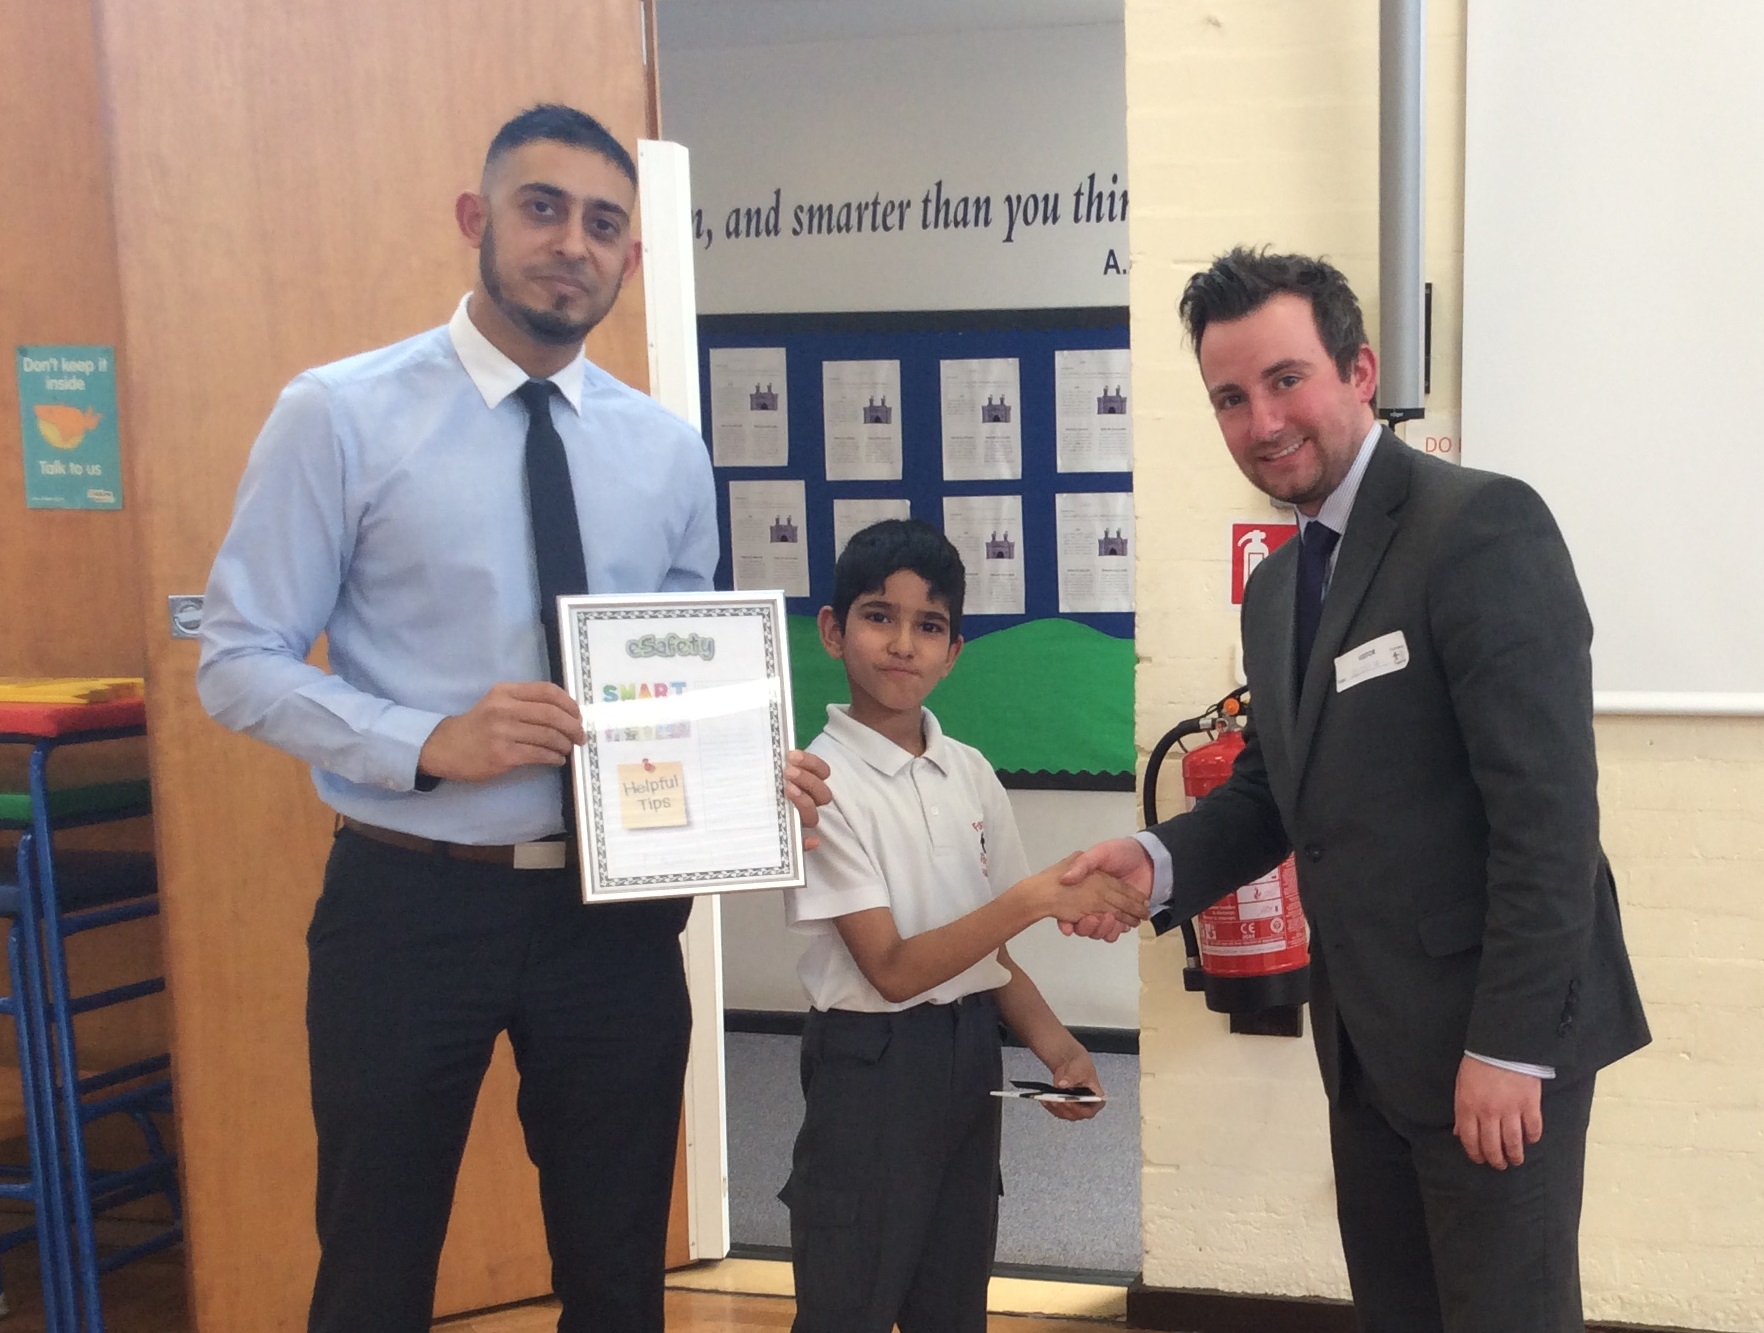 3rd place Jatinder from Hargate Primary School receiving prize form Alex Cox, PK Education and teacher, Mr Anwar